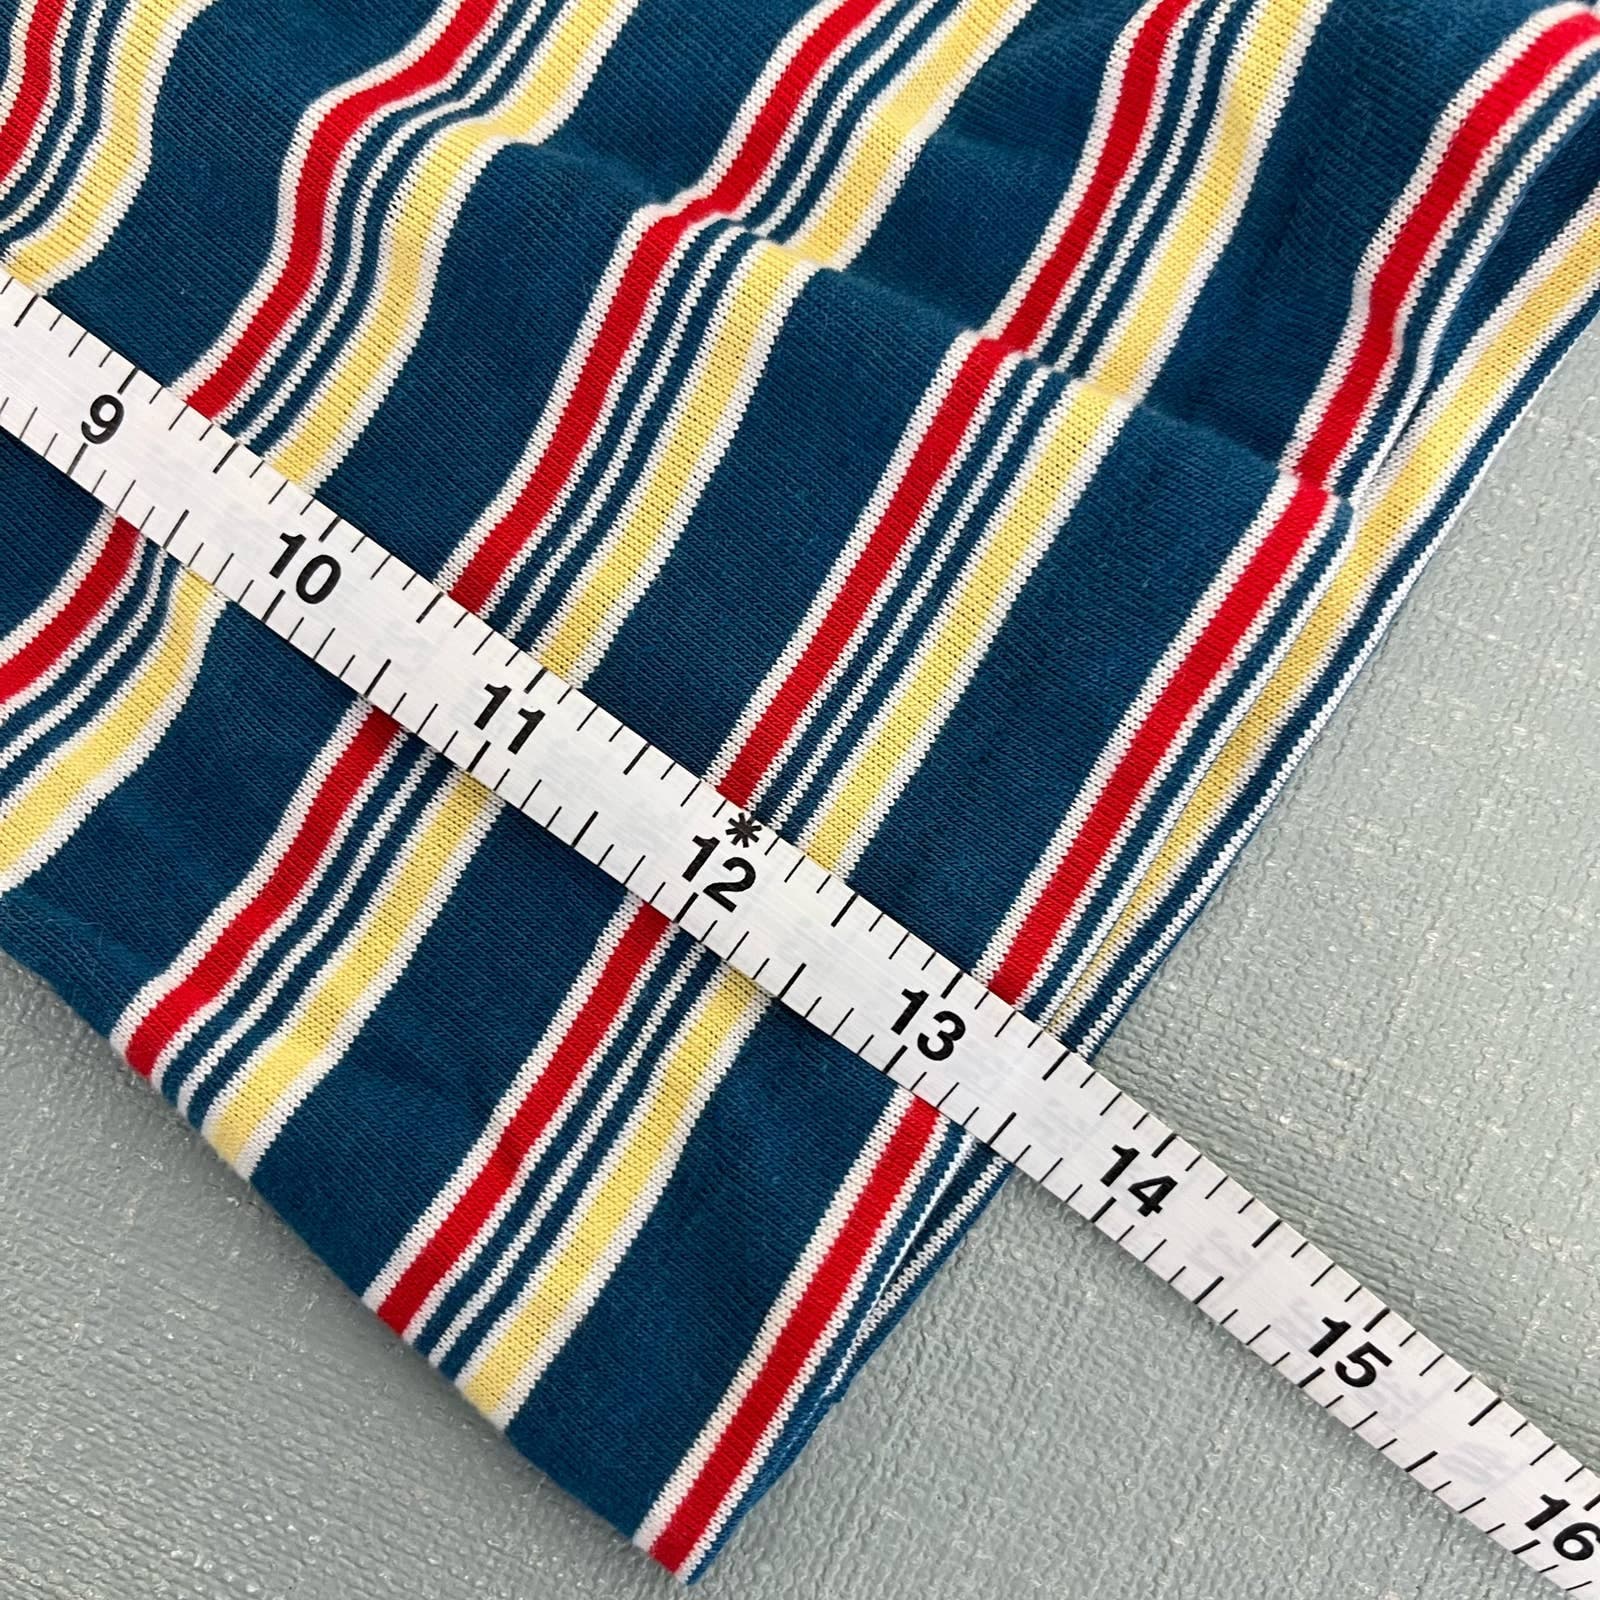 Vintage Lacoste Colorful Striped Long Sleeve Shirt 3T USA